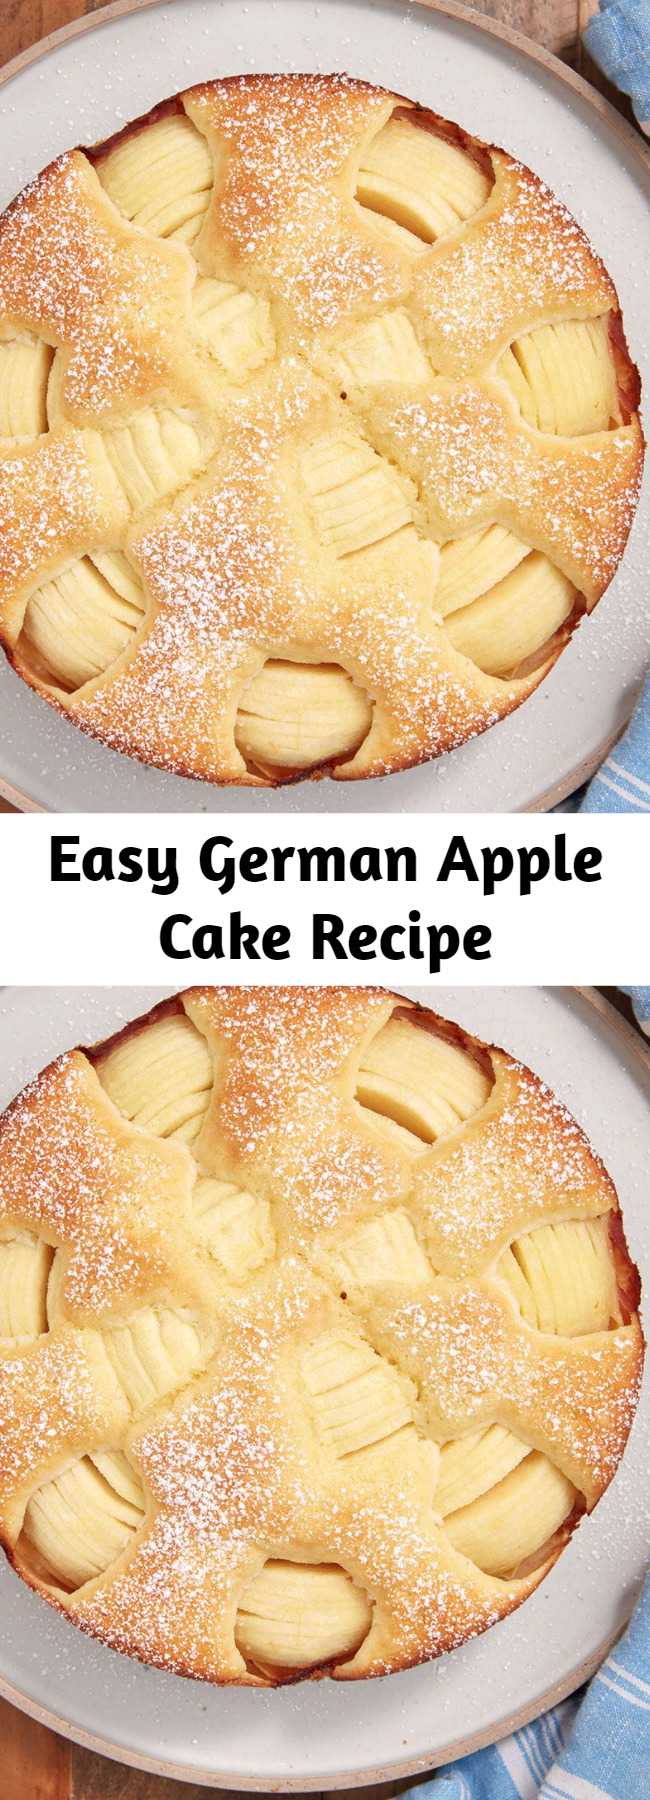 Easy German Apple Cake Recipe - This gorgeous apple cake is so much easier than it looks. Put those apples on display with this German Apple Cake.